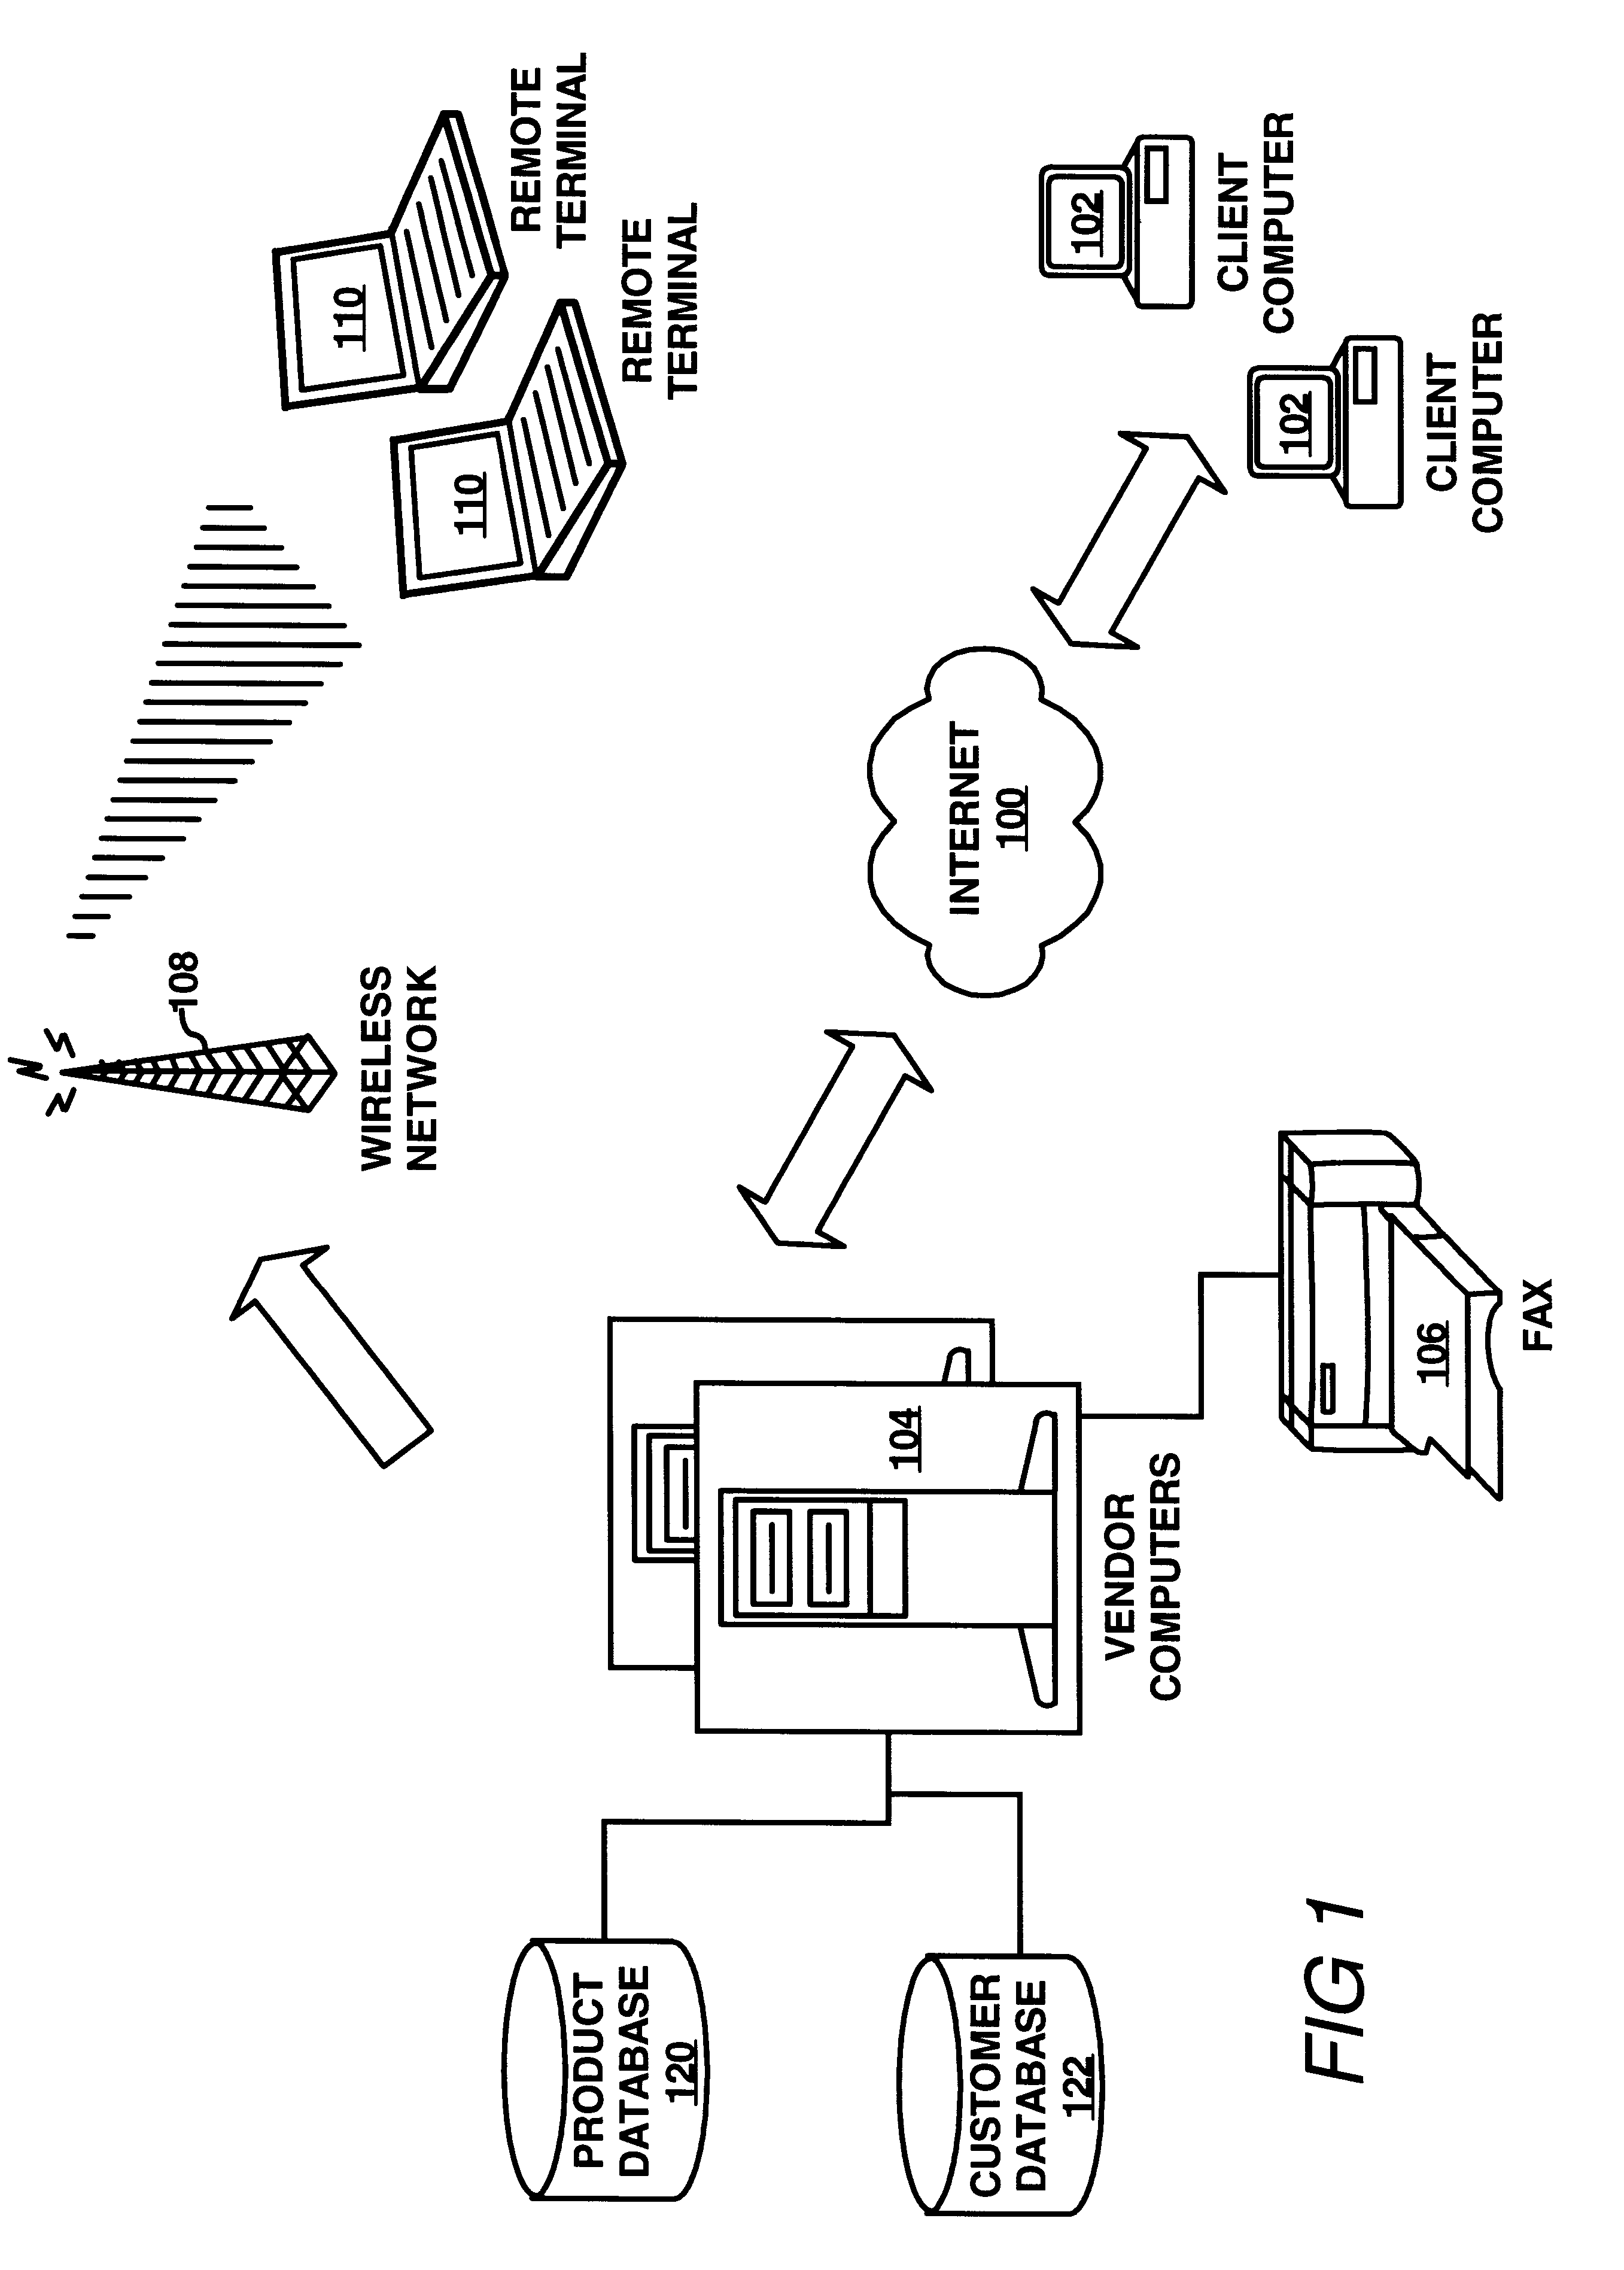 Apparatus for providing instant vendor notification in an electronic commerce network environment